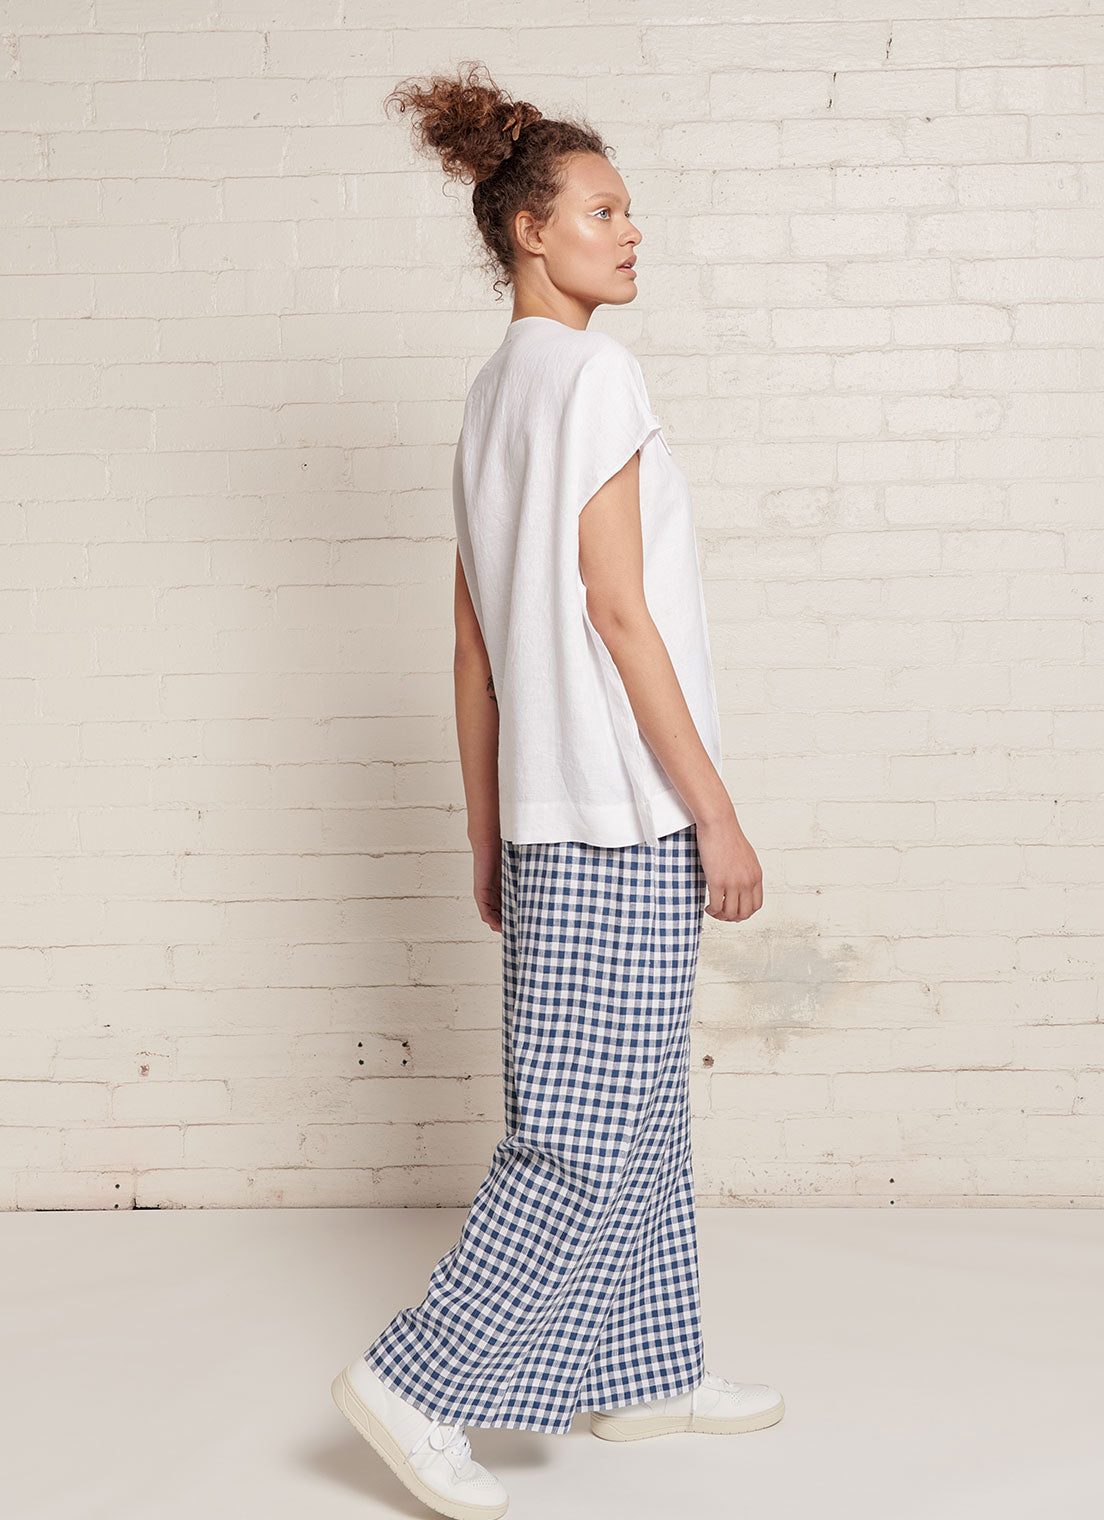 An indigo and white gingham, wide-leg pants with wide and elasticated back waistband and side pockets in small gingham yarn dye washed linen